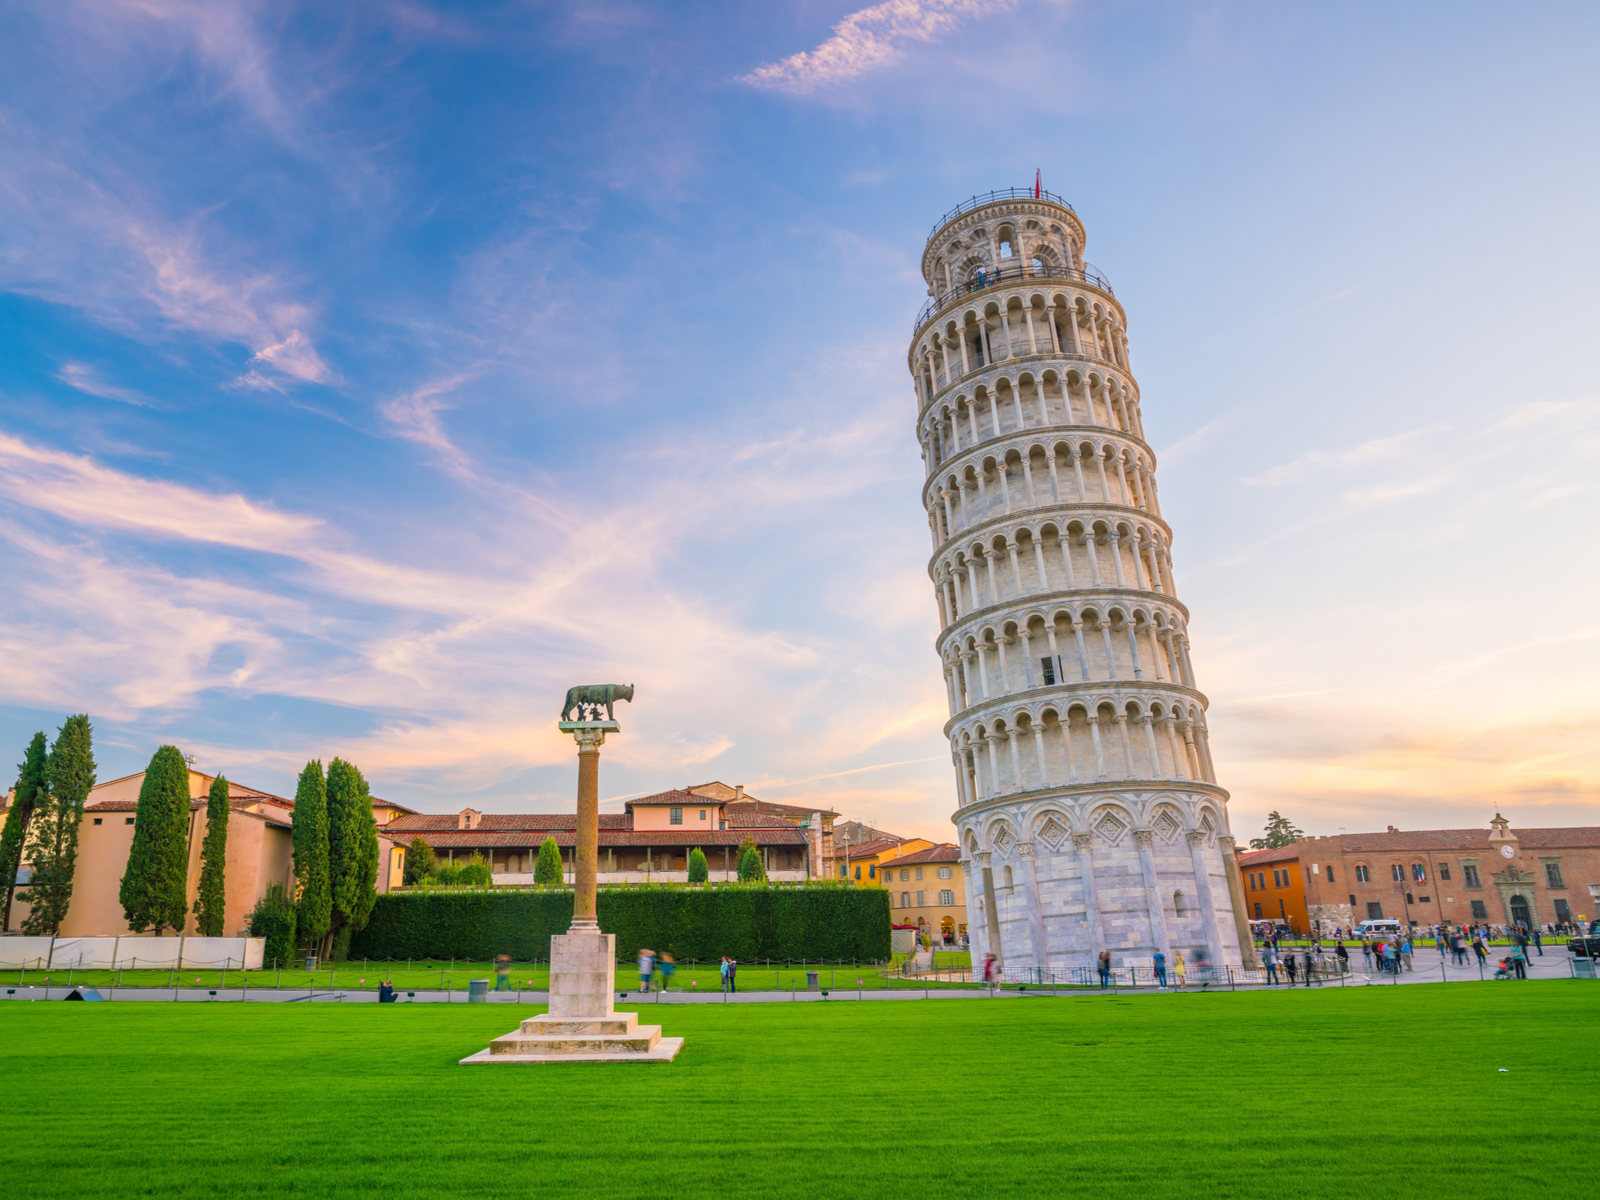 Leaning tower of Pisa pictured during the best time to visit Italy